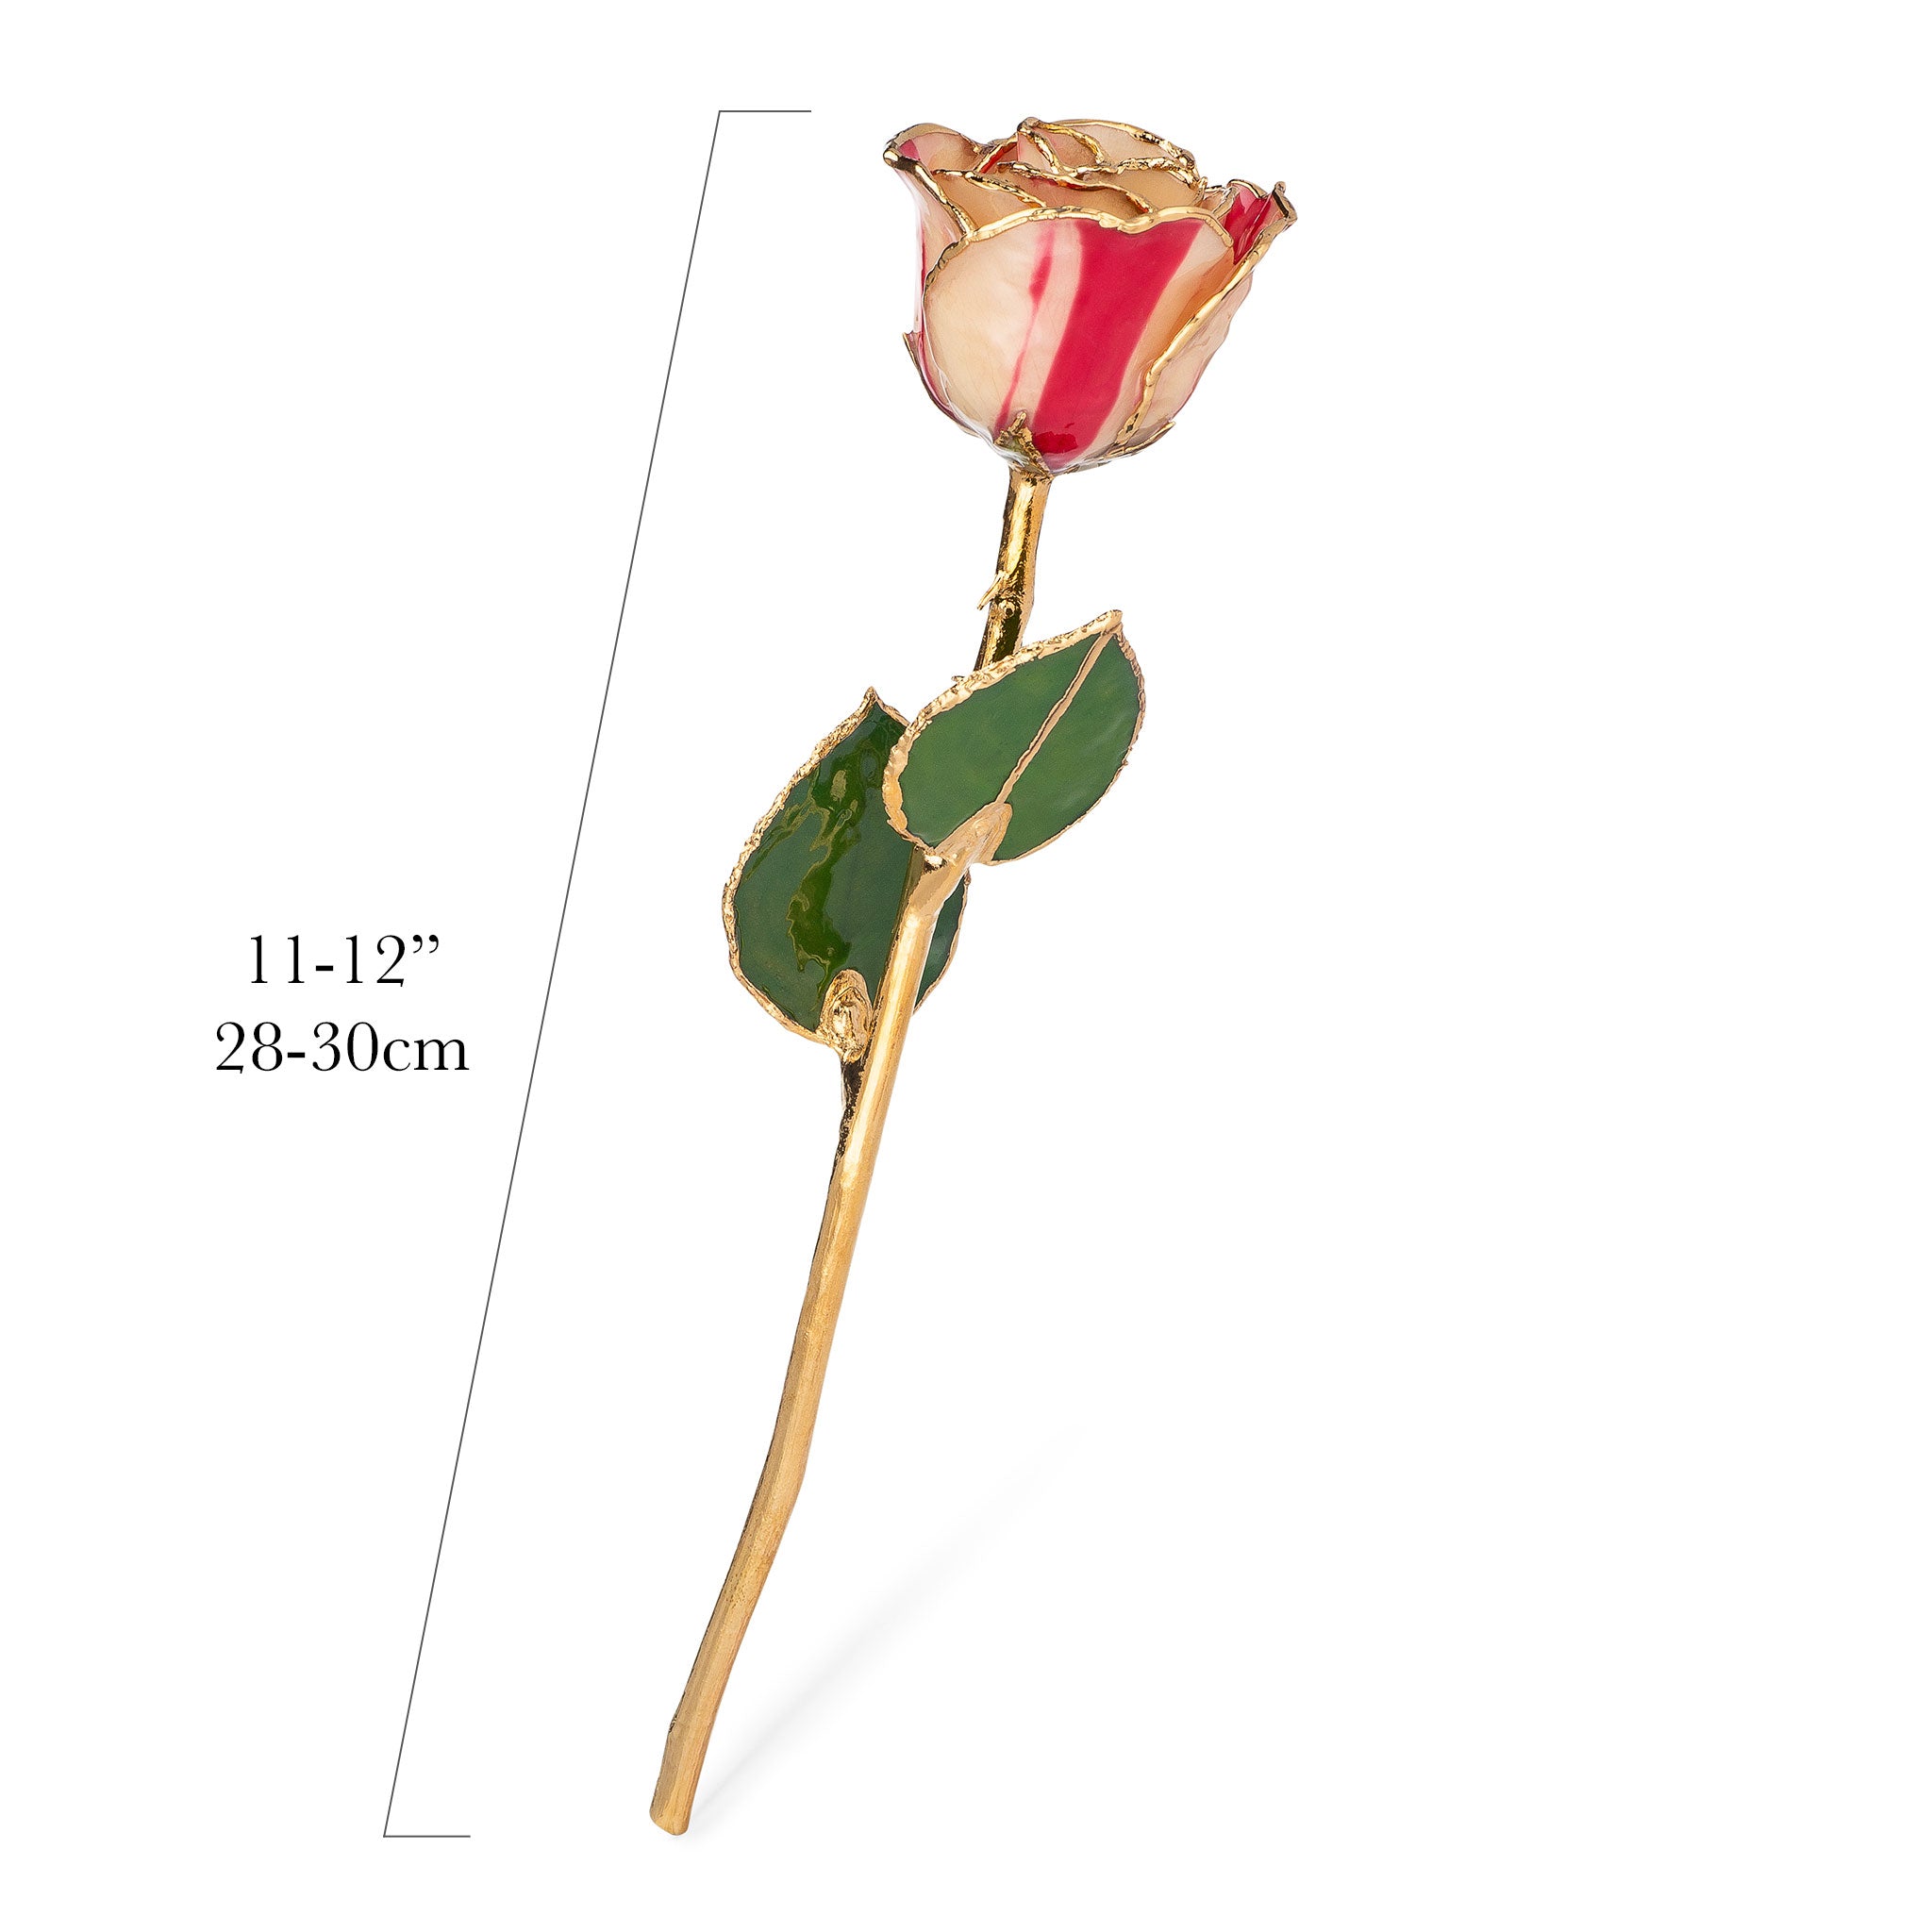 24K Gold Trimmed Forever Rose with Peppermint Striped Petals. View of Stem, Leaves, and Rose Petals and Showing Detail of Gold Trim view showing measurements